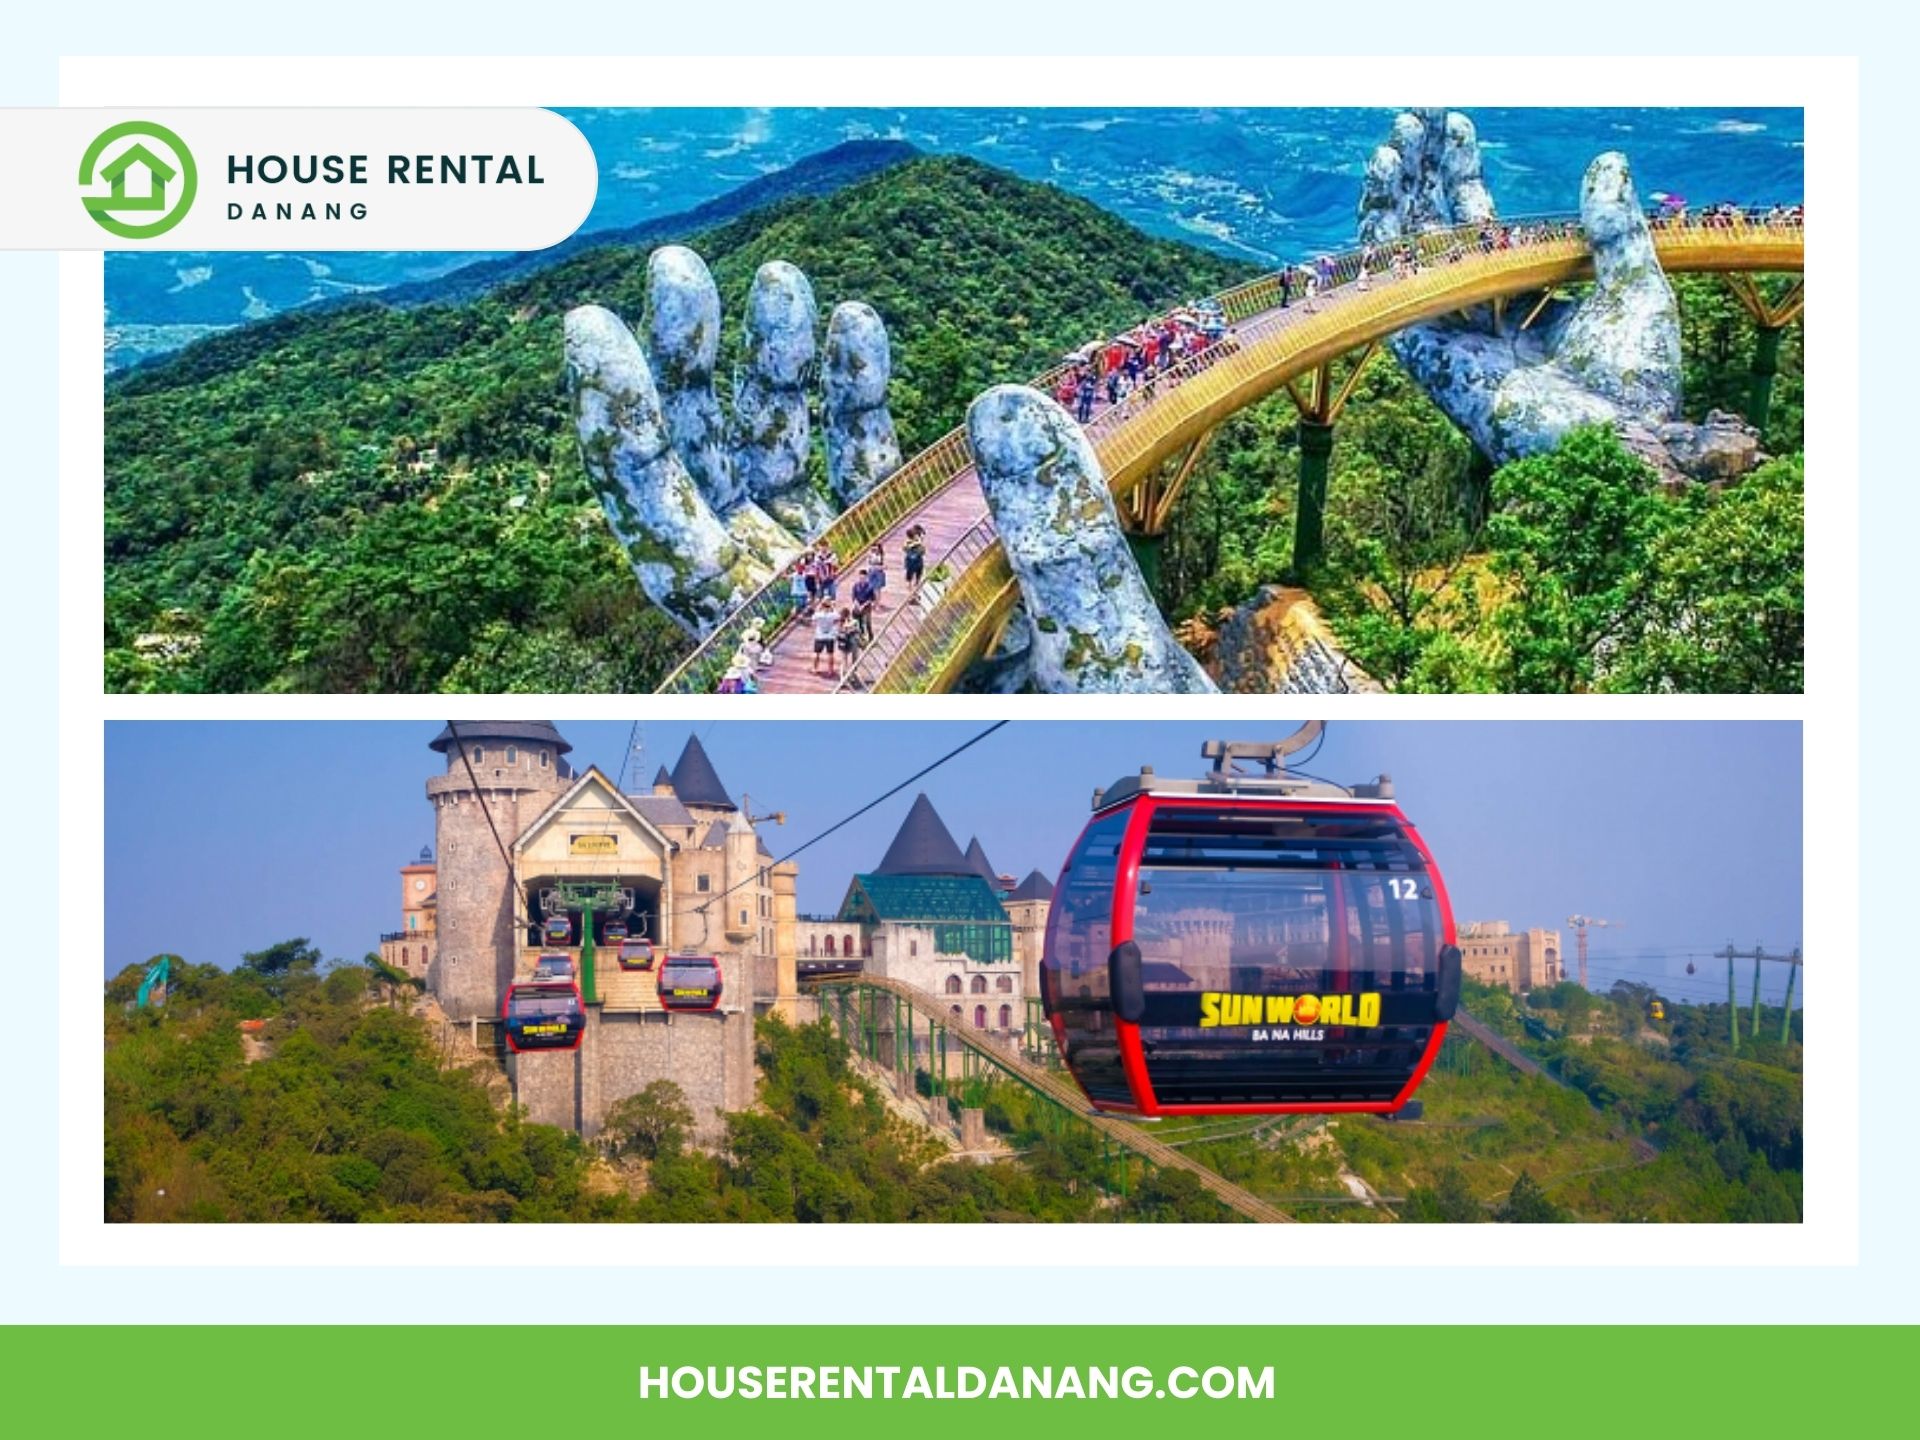 Two images: The top shows a pedestrian bridge held by giant stone hands in a lush, hilly area. The bottom shows colorful cable cars labeled "Sun World" with a castle-like structure in the background, highlighting two of the best places to visit in Da Nang.